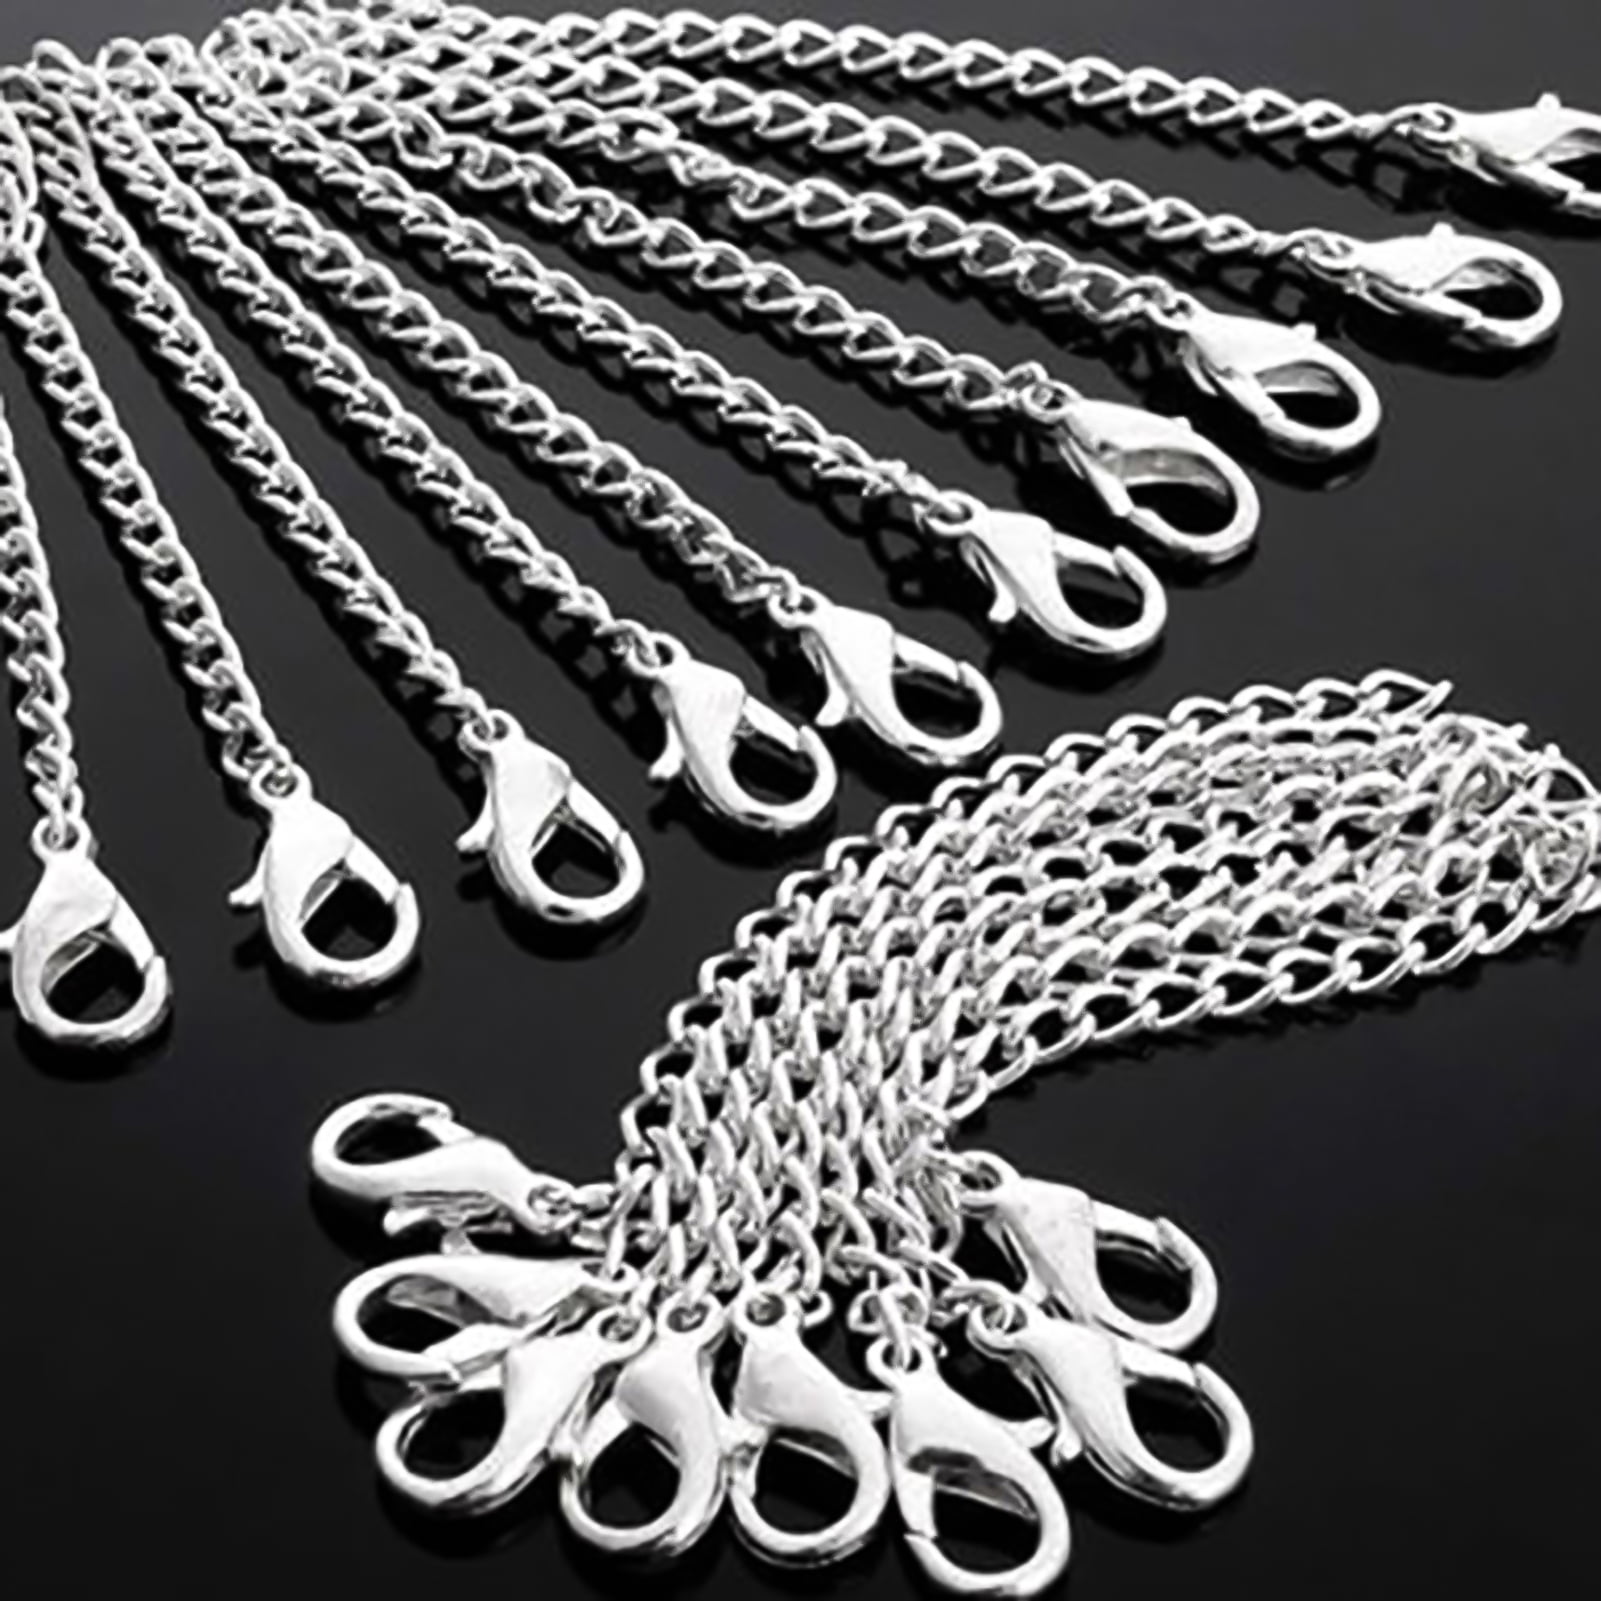 33ft Stainless Steel Jewelry Chains Silver Extender Chains Twisted Cable Chains Link Bulk for Jewelry Makings